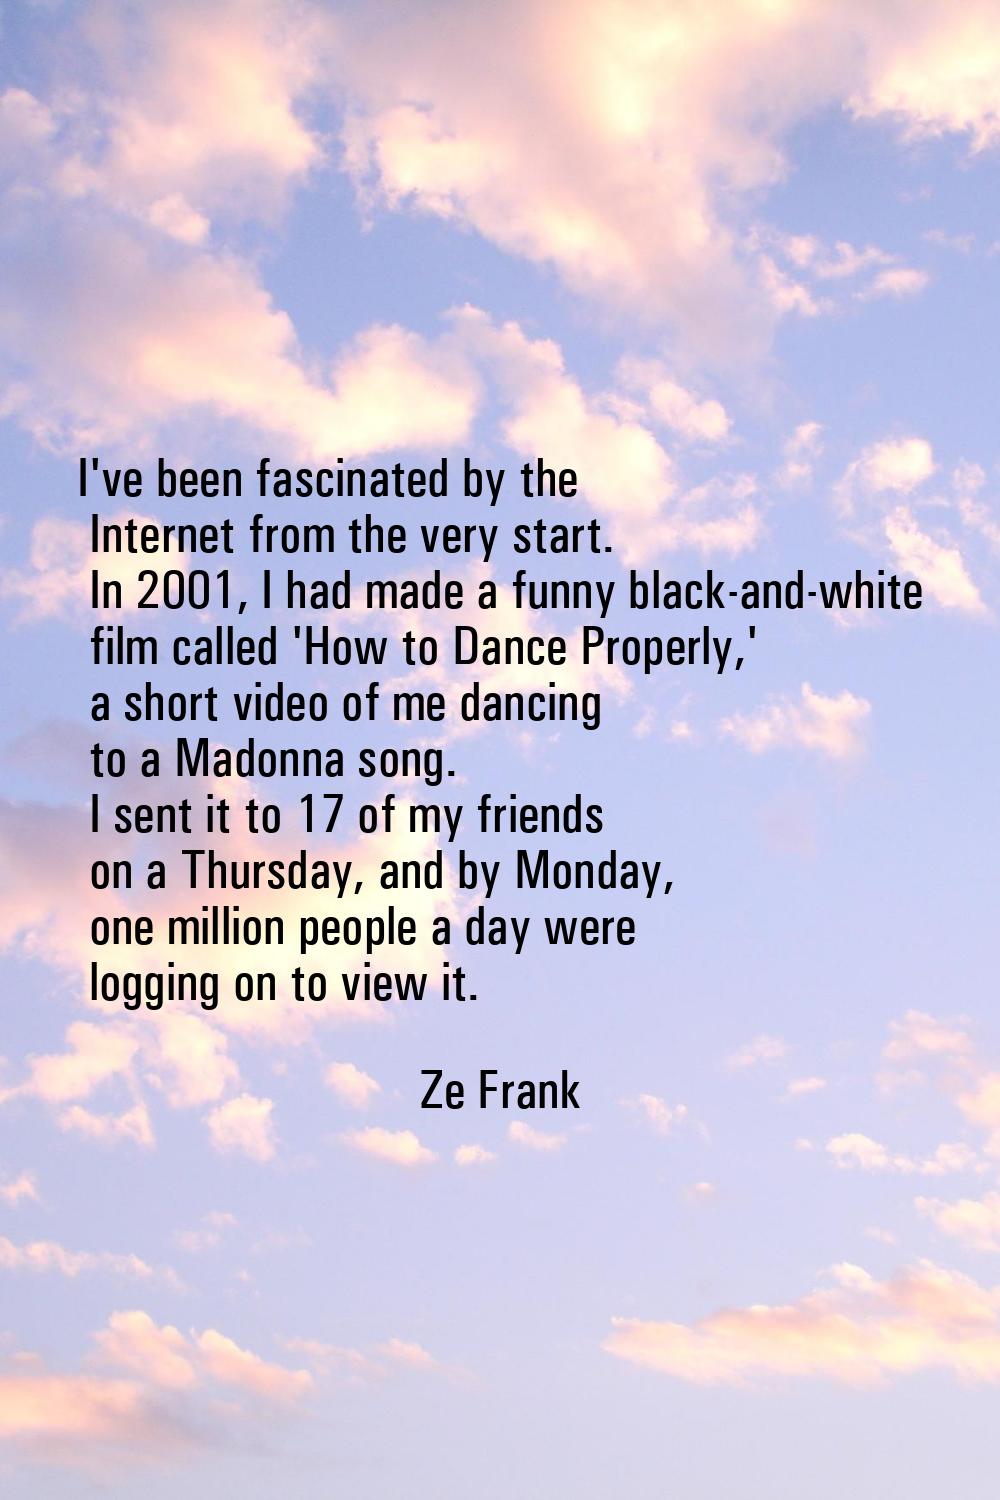 I've been fascinated by the Internet from the very start. In 2001, I had made a funny black-and-whi